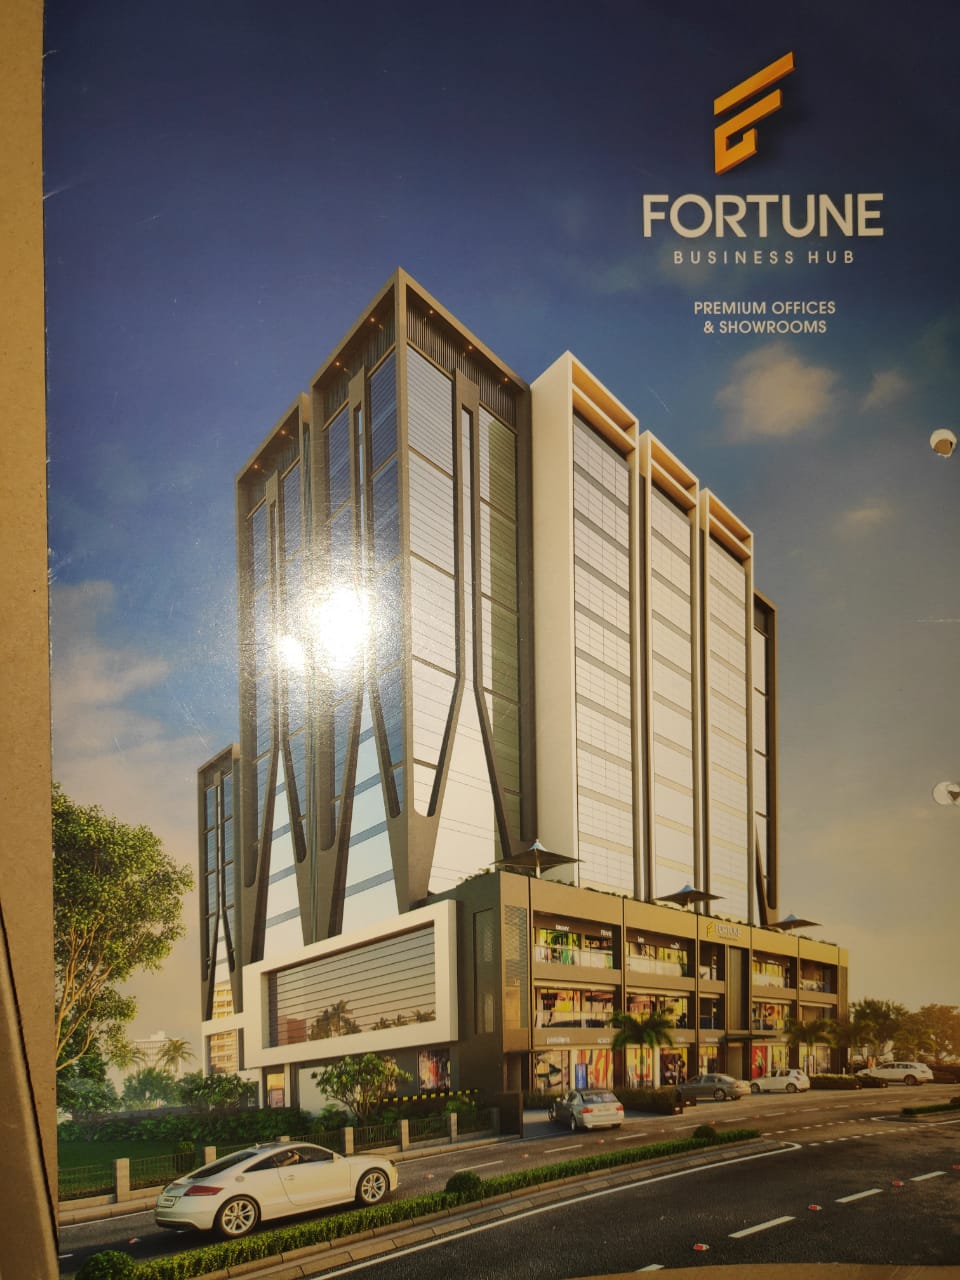 Showroom For Rent in Fortune Business Hub, Science City, Ahmedabad.